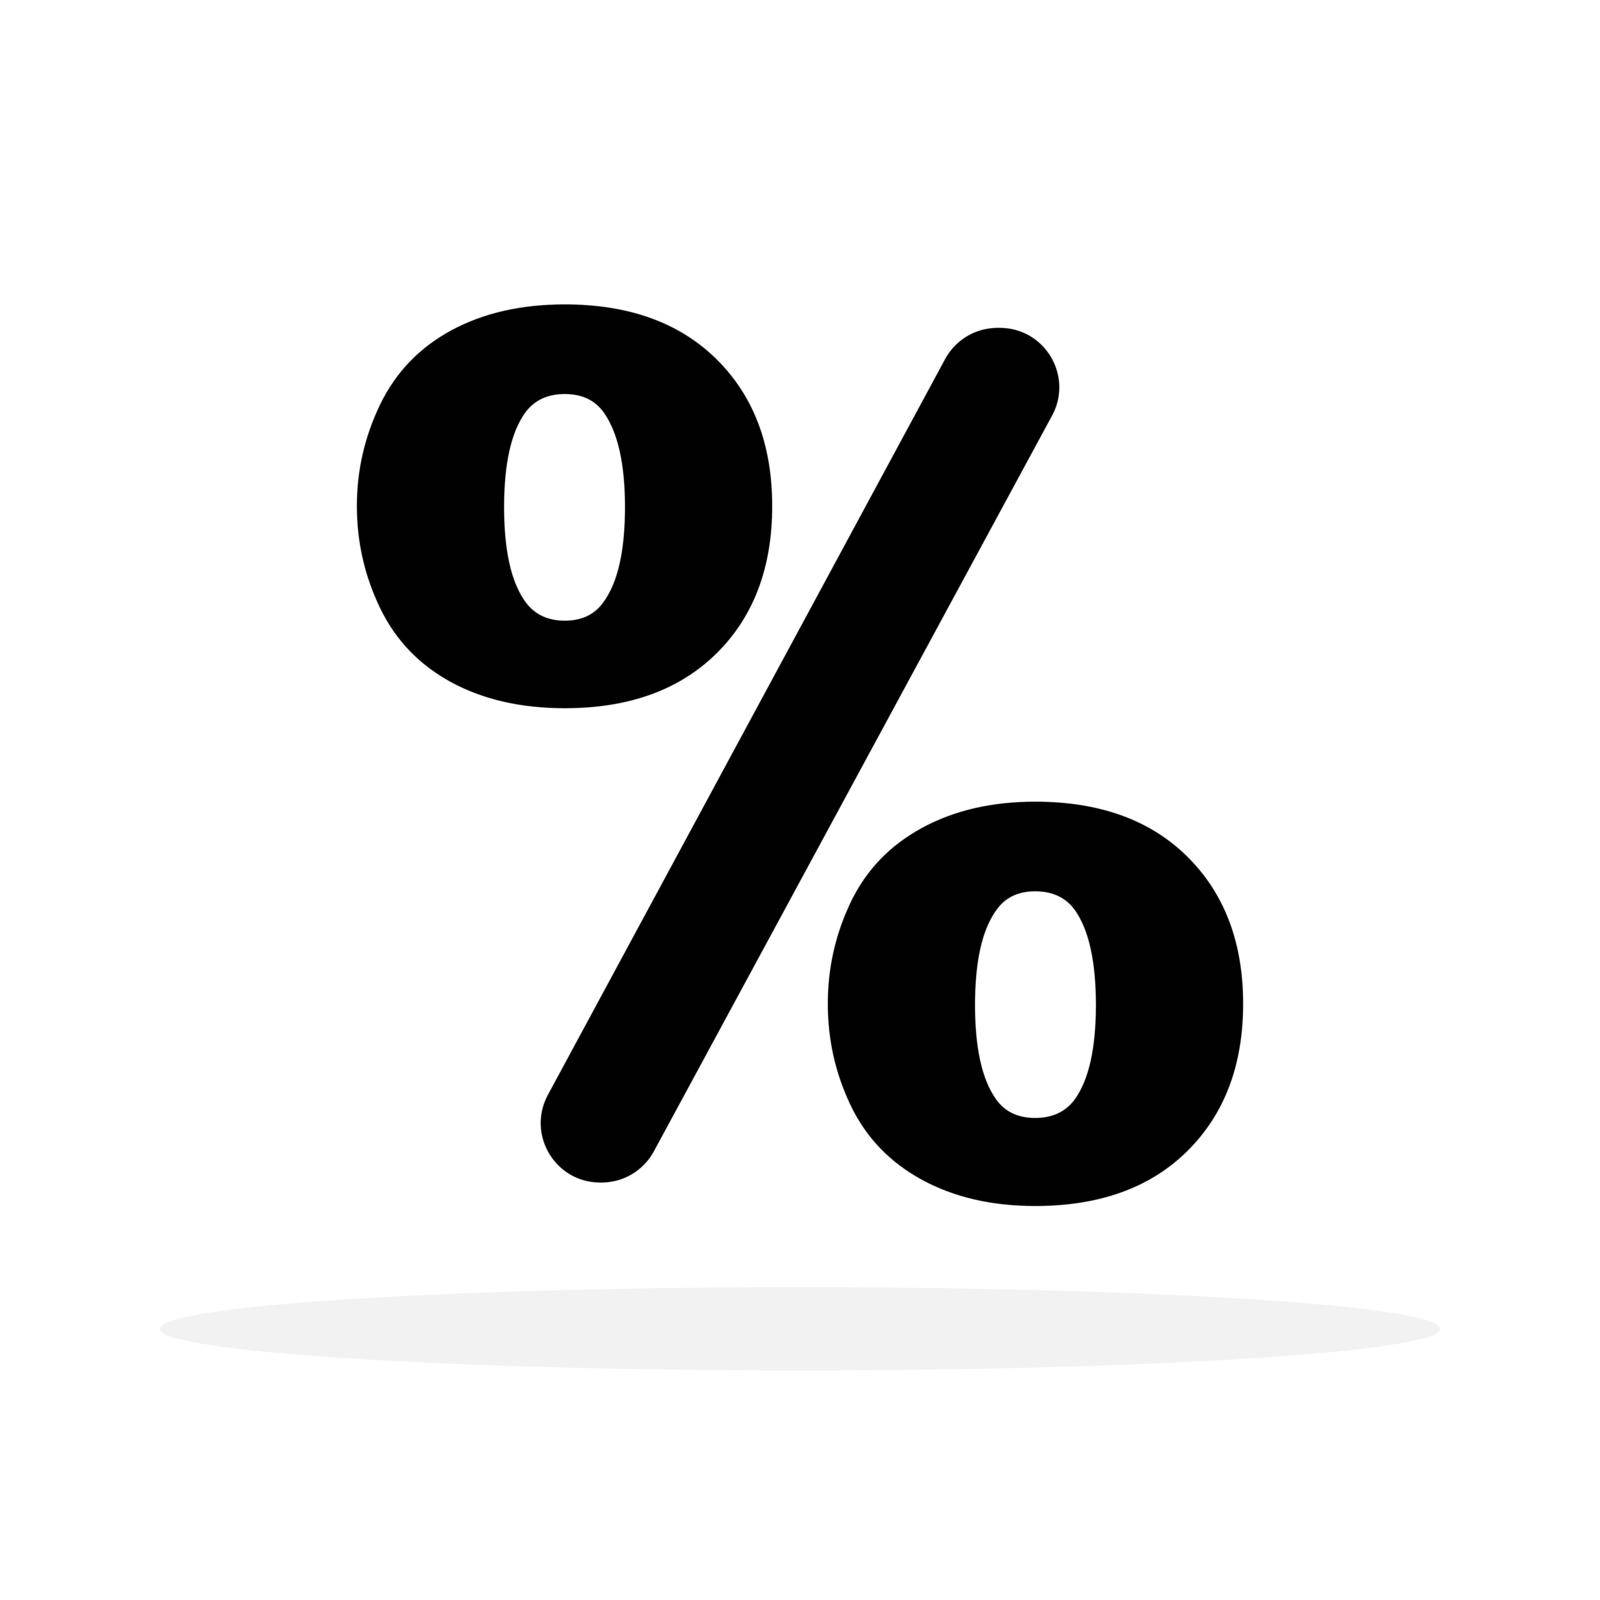 Percentage icon. Linear percentage icon isolated. Sale percentage symbol. by Chekman